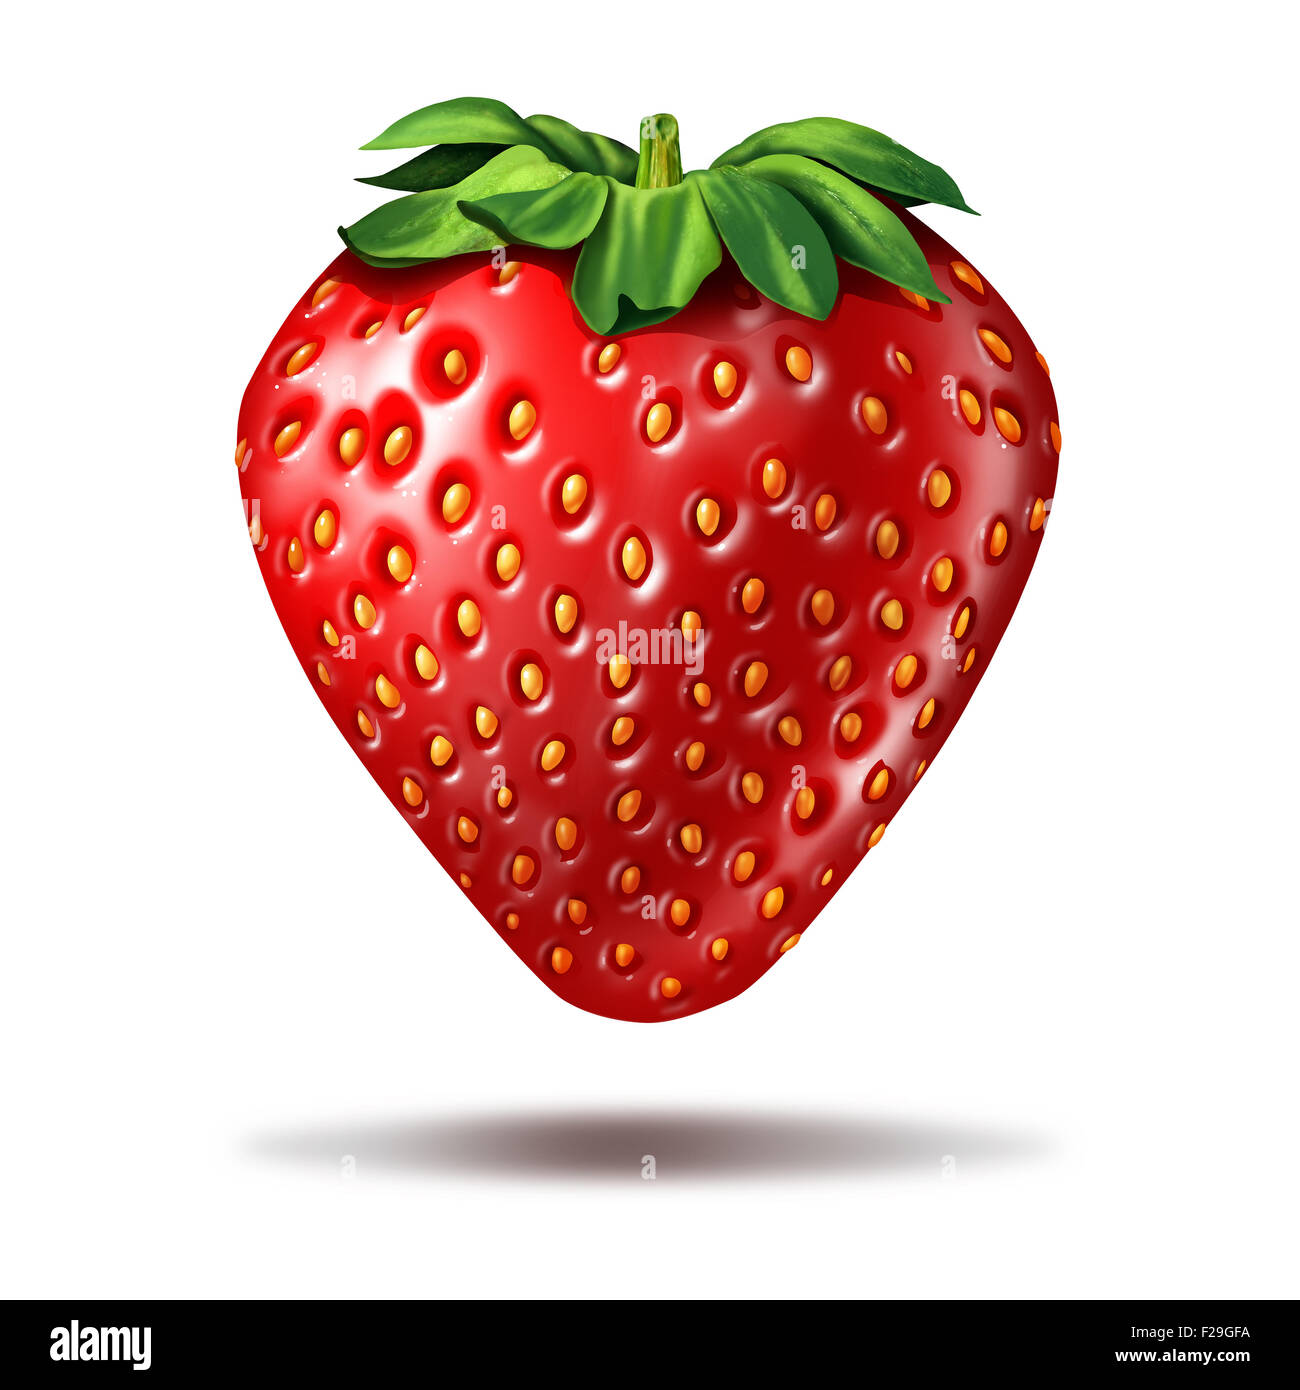 Strawberry fruit illustration on a white background with a shadow as a delicious ripe fresh organic berry with vibrant red color as a symbol for fresh market food or sweete natural ingredient. Stock Photo